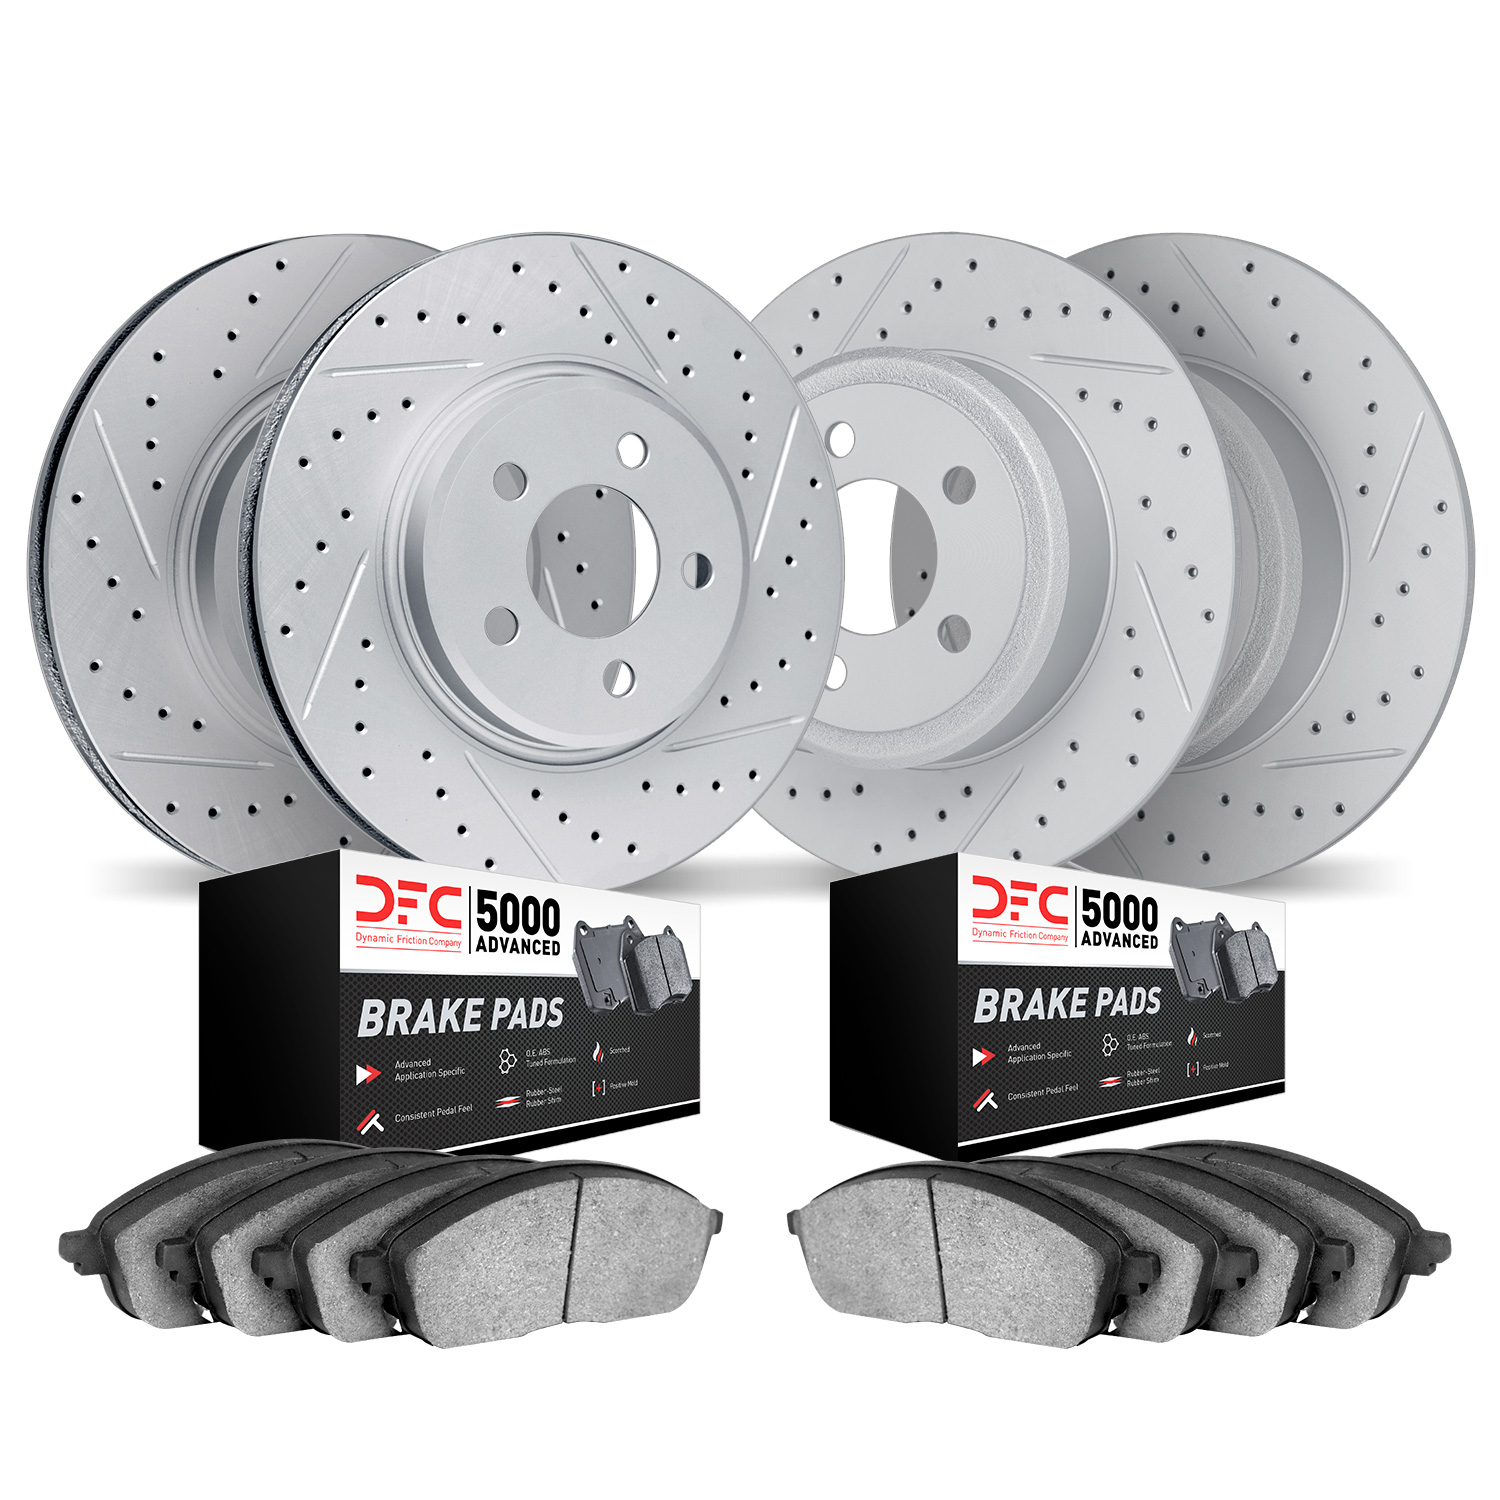 2504-75004 Geoperformance Drilled/Slotted Rotors w/5000 Advanced Brake Pads Kit, 2014-2015 Lexus/Toyota/Scion, Position: Front a